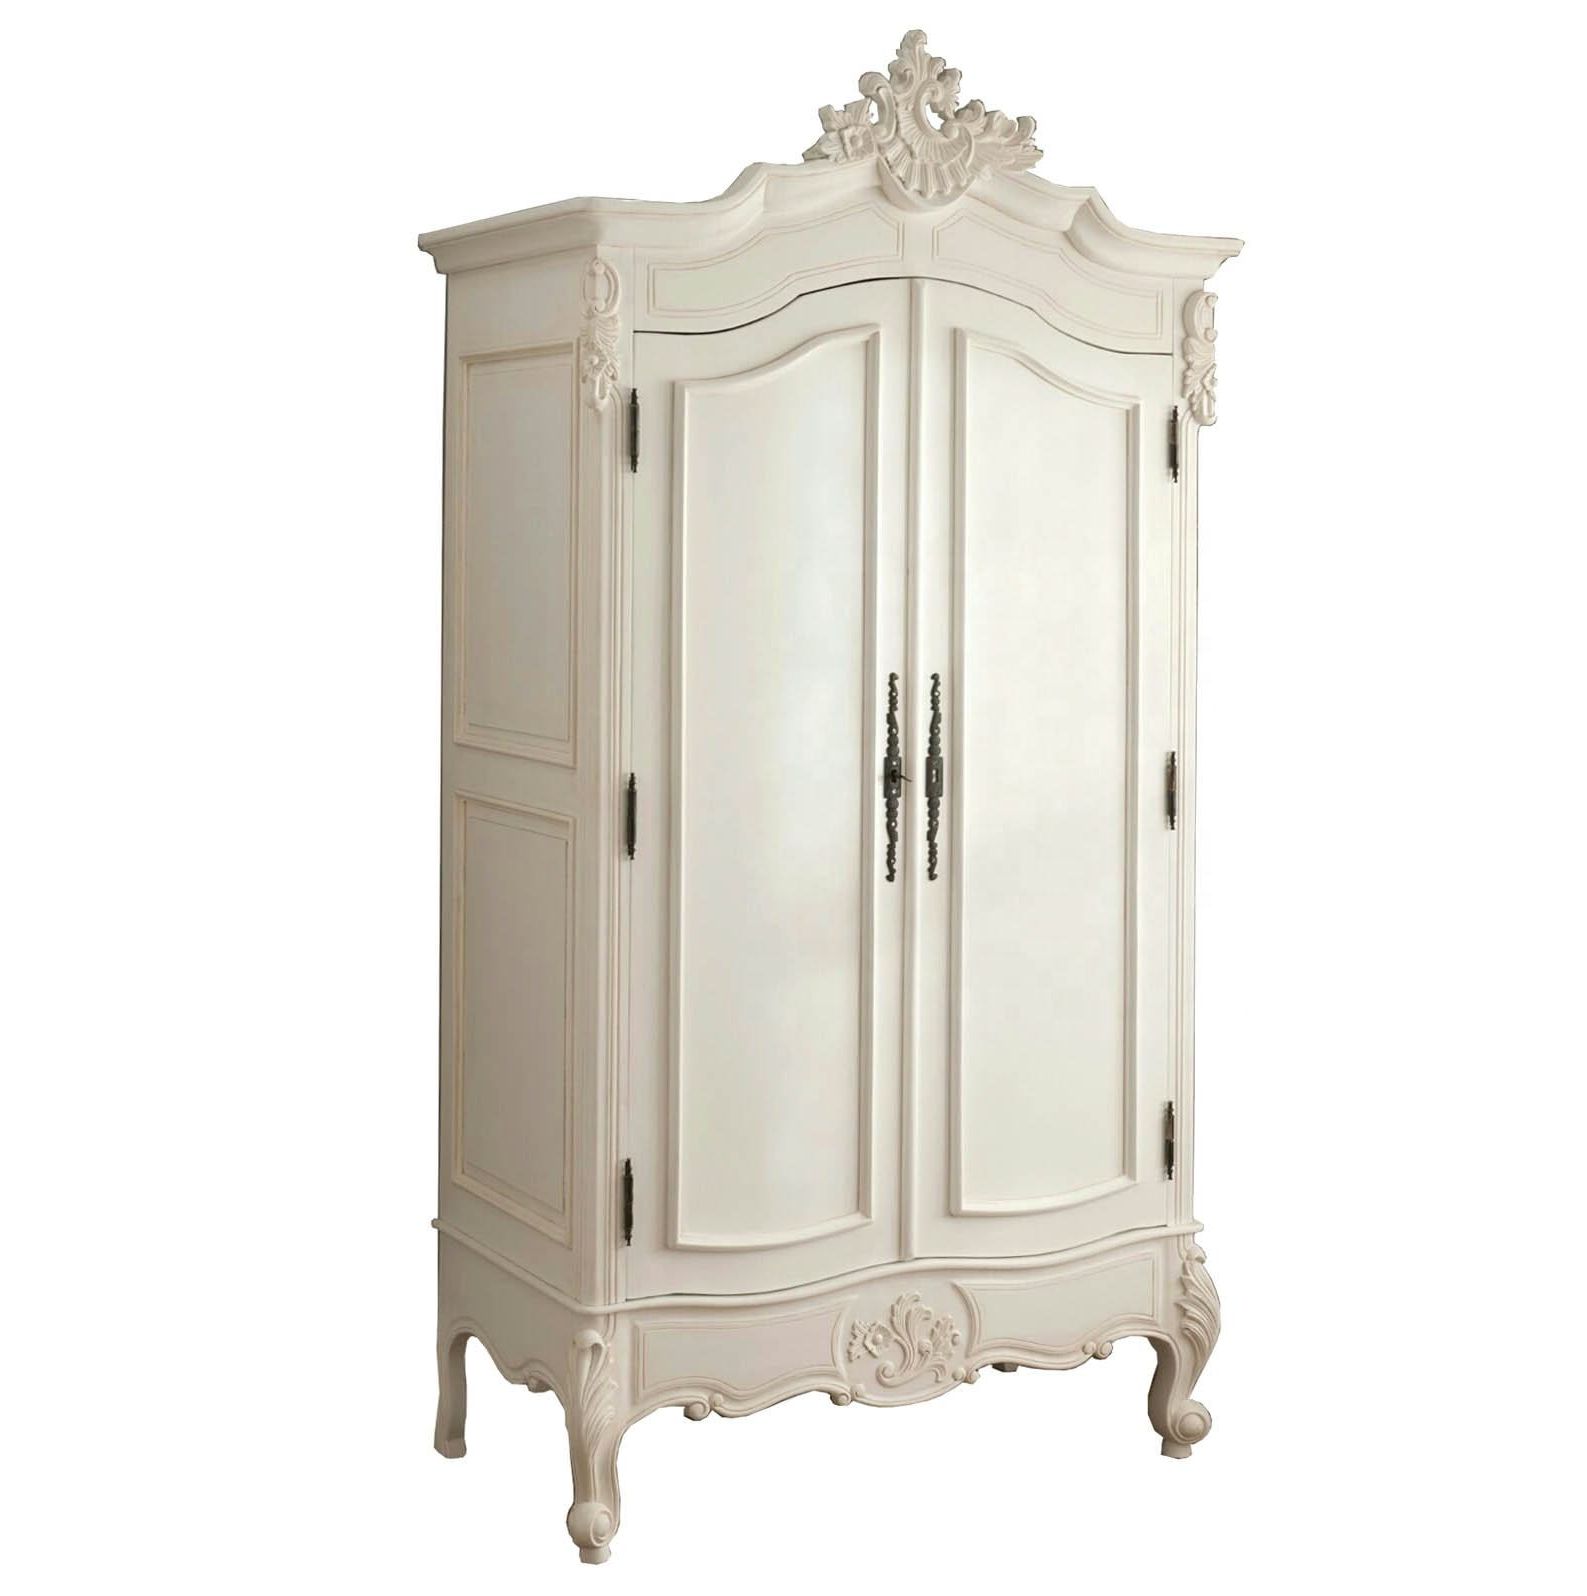 Source Antique White Painted French Style Armoire Wooden Wardrobes 2 Doors  On M (View 8 of 20)